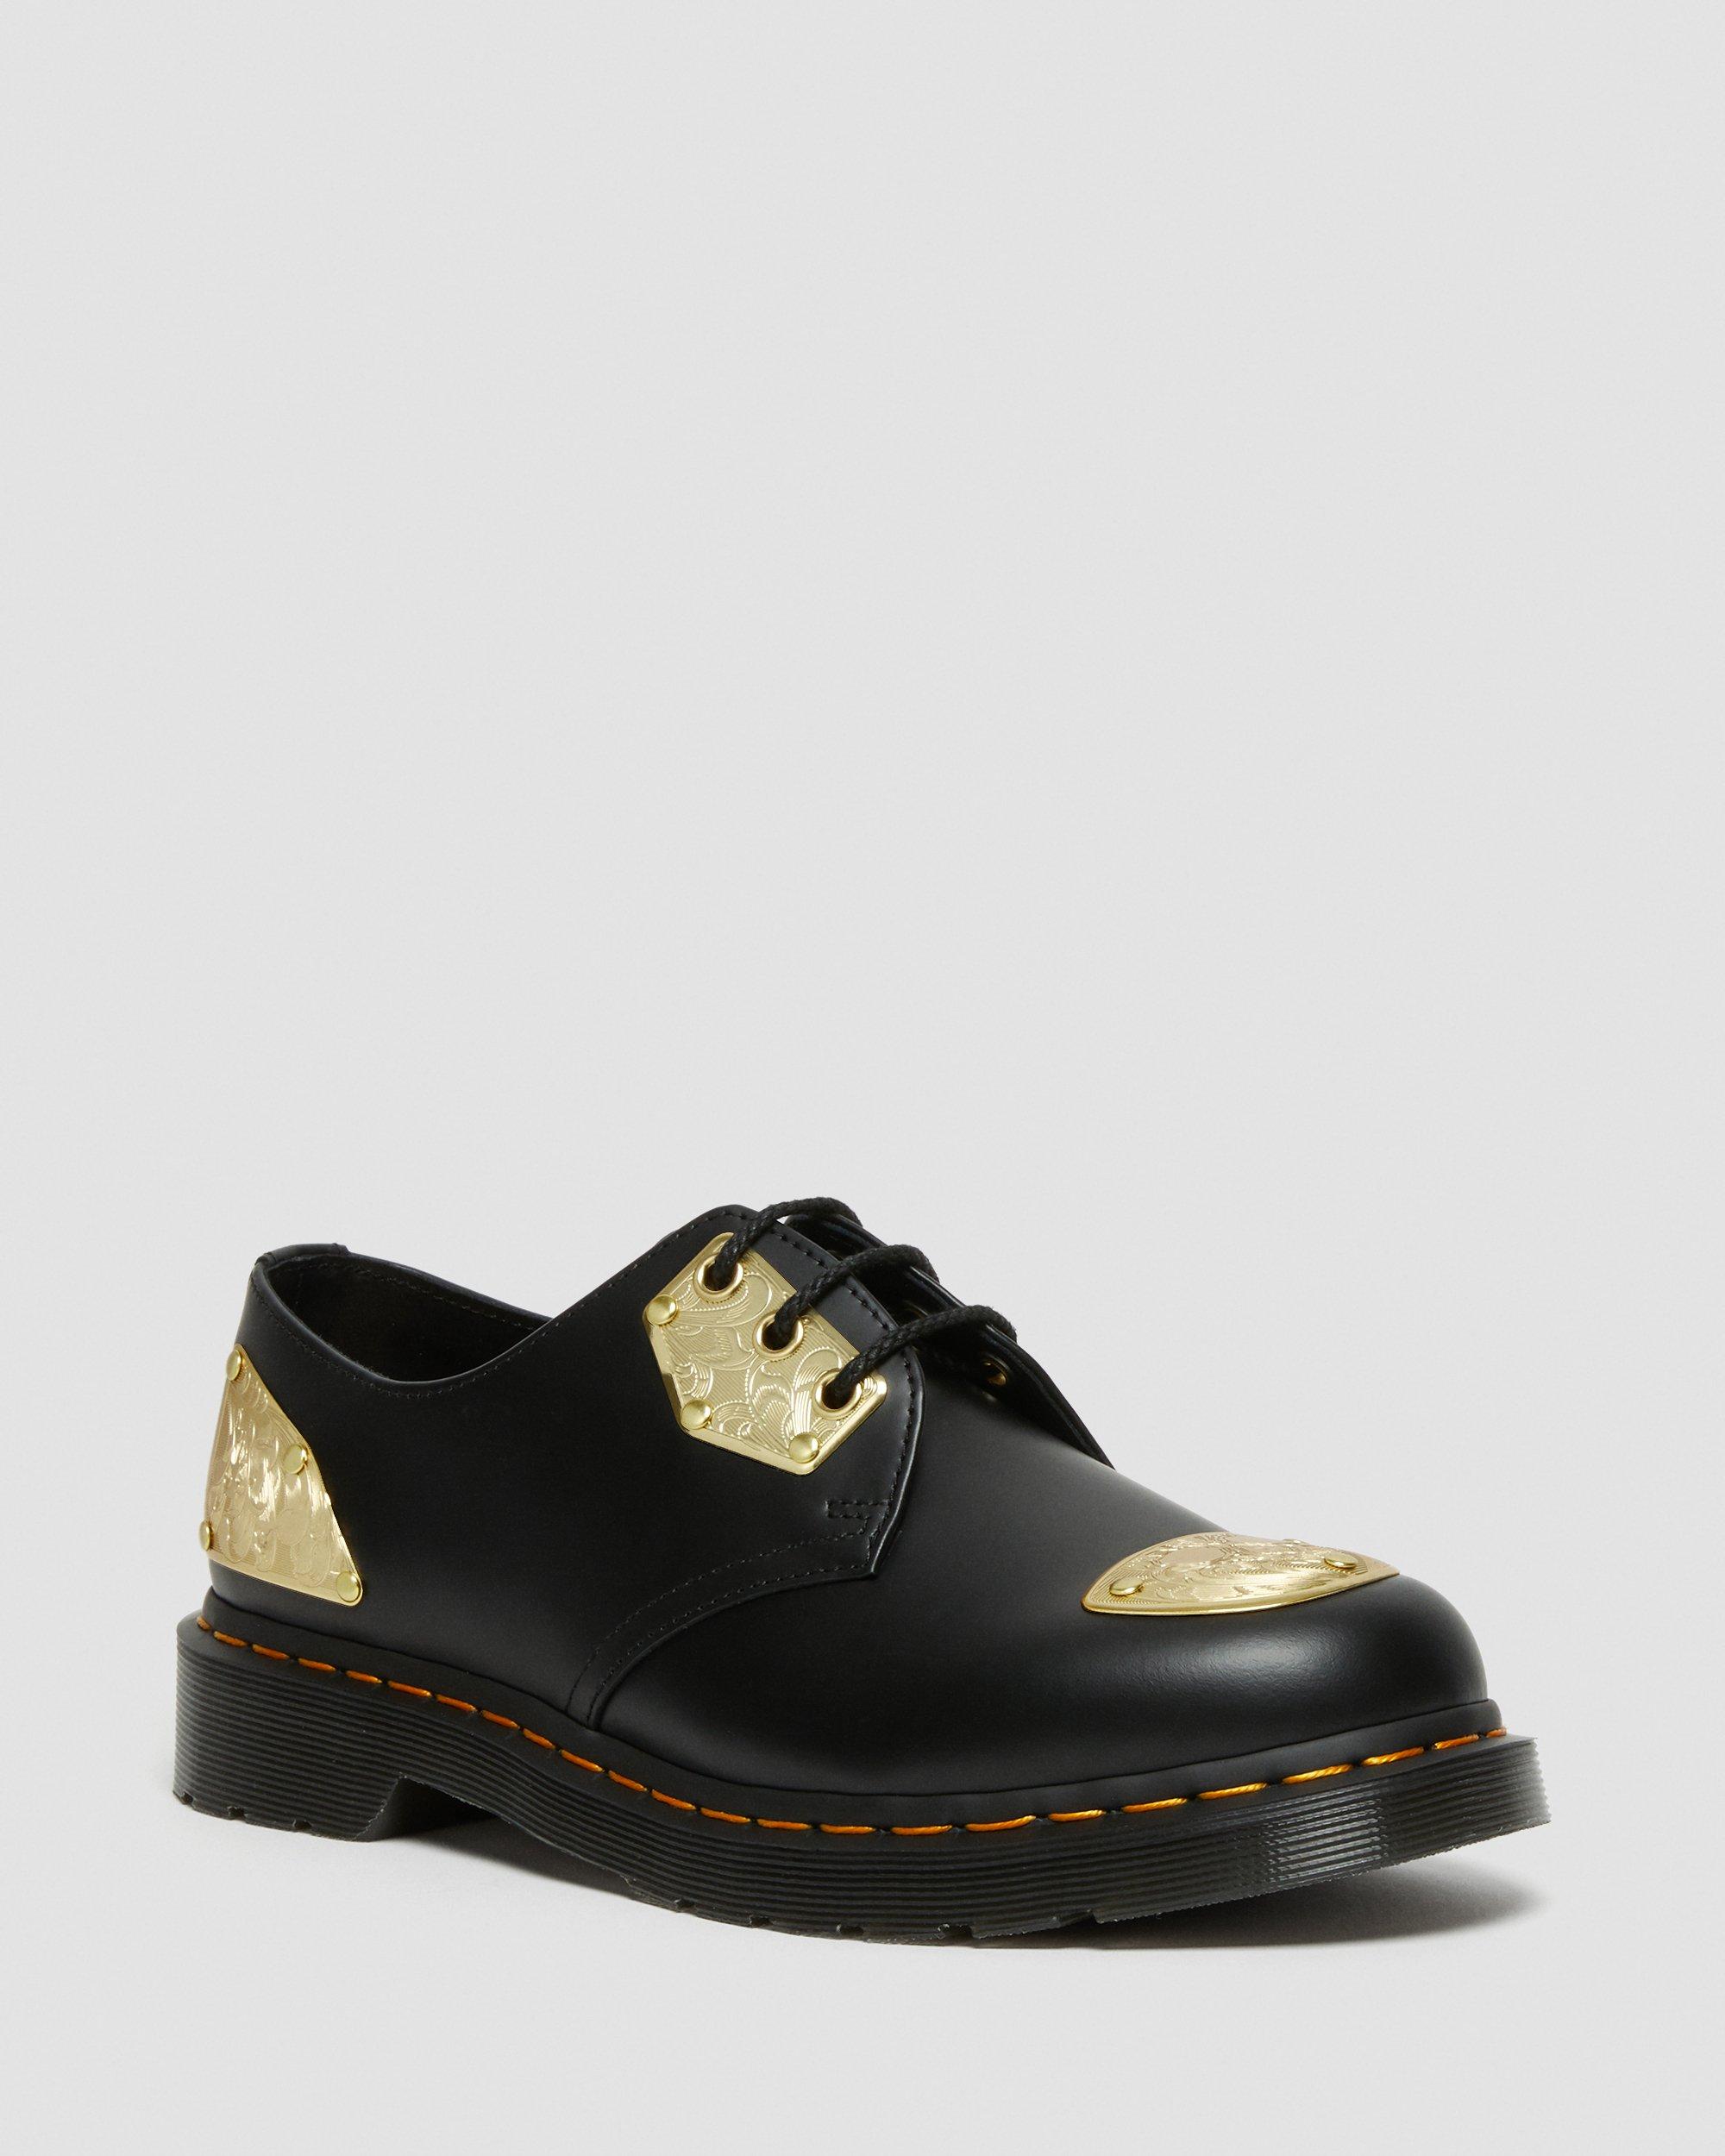 King Nerd 1461 Leather Oxford Shoes in Black | Dr. Martens